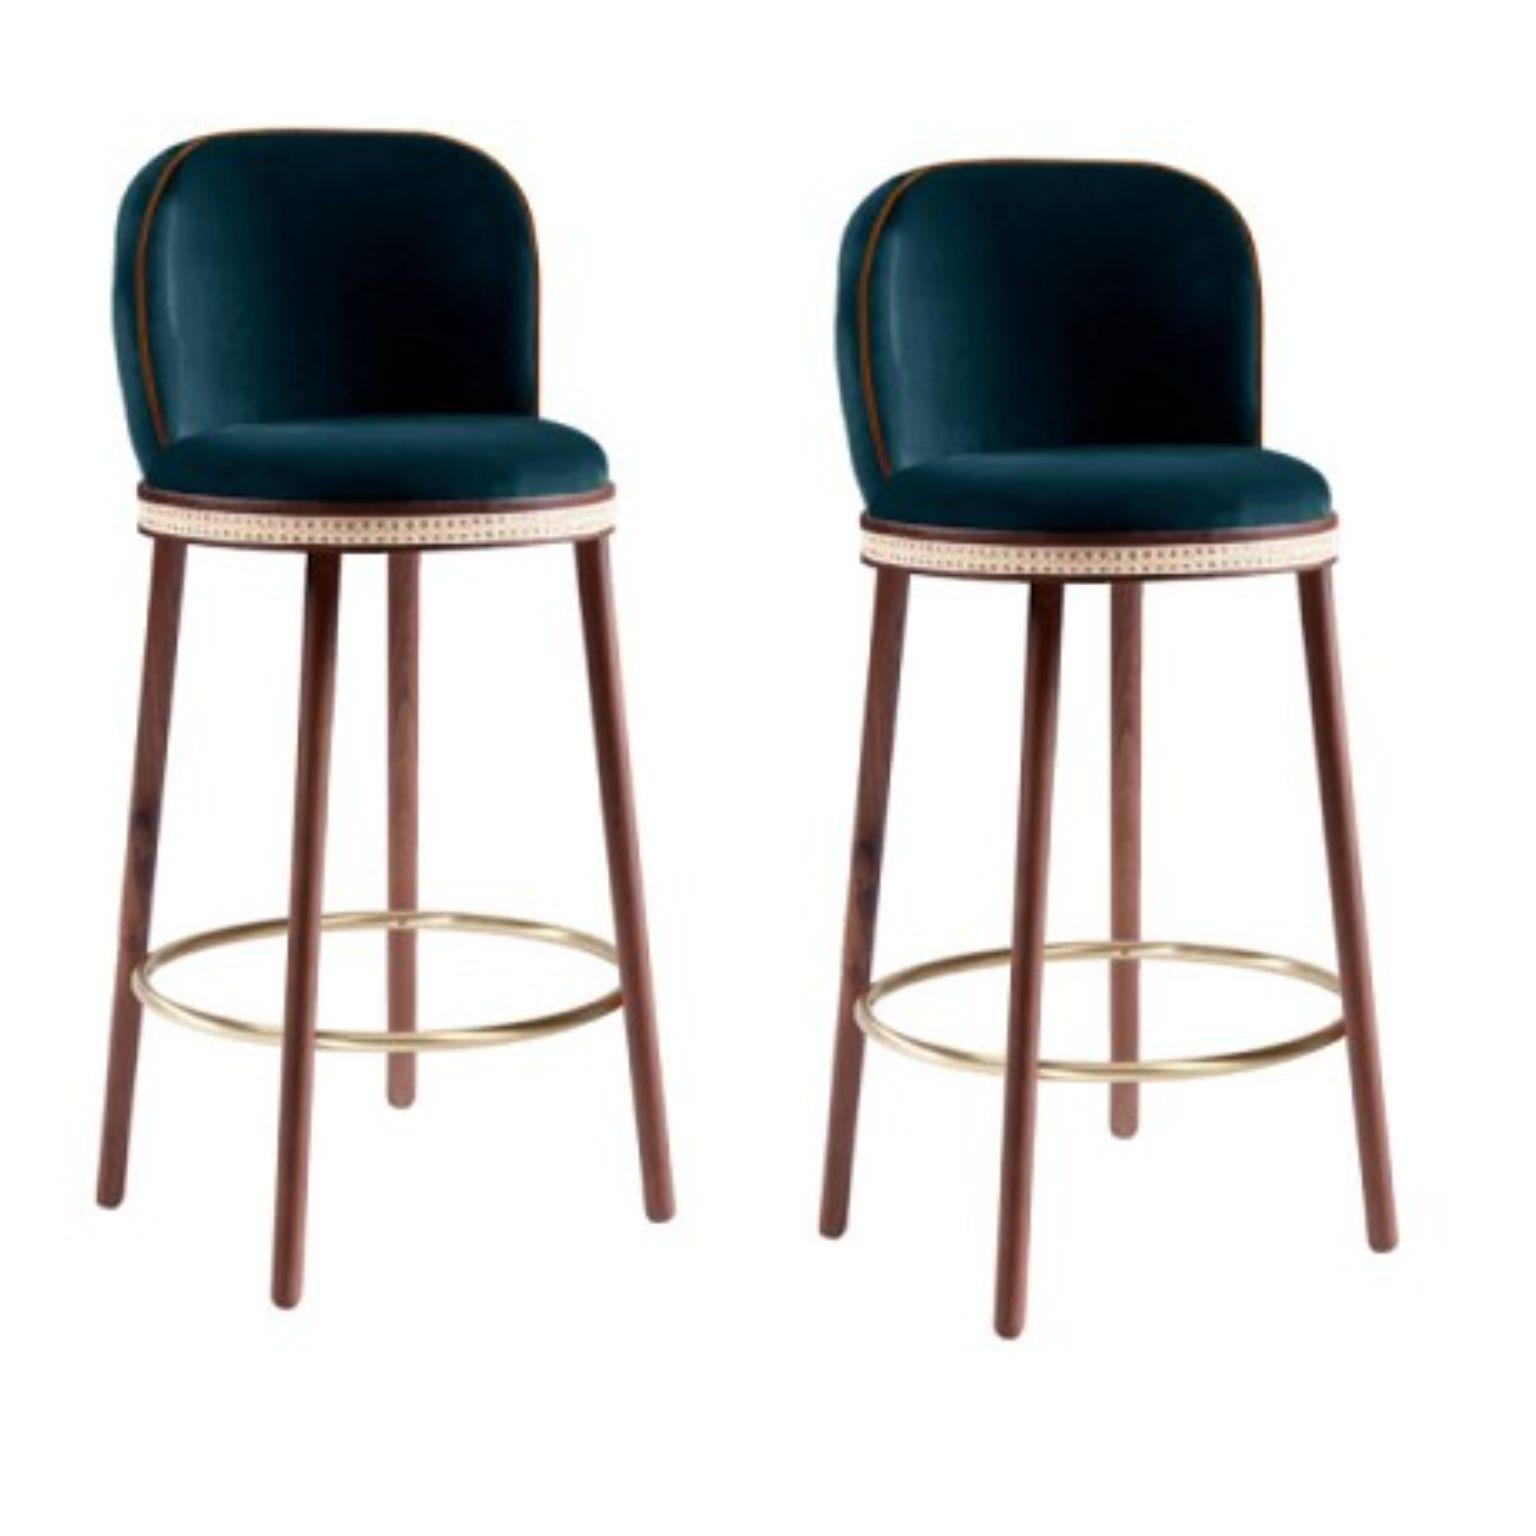 Set of 2 Alma Bar Chairs by Dooq
Dimensions:
W 46 cm 18”
D 51 cm 20”
H 100 cm 39”
seat height: 75 cm 30”
Materials: upholstery fabric or leather; structure solid wood feet lacquered MDF or solid wood rattan natural rattan. COM with natural walnut or